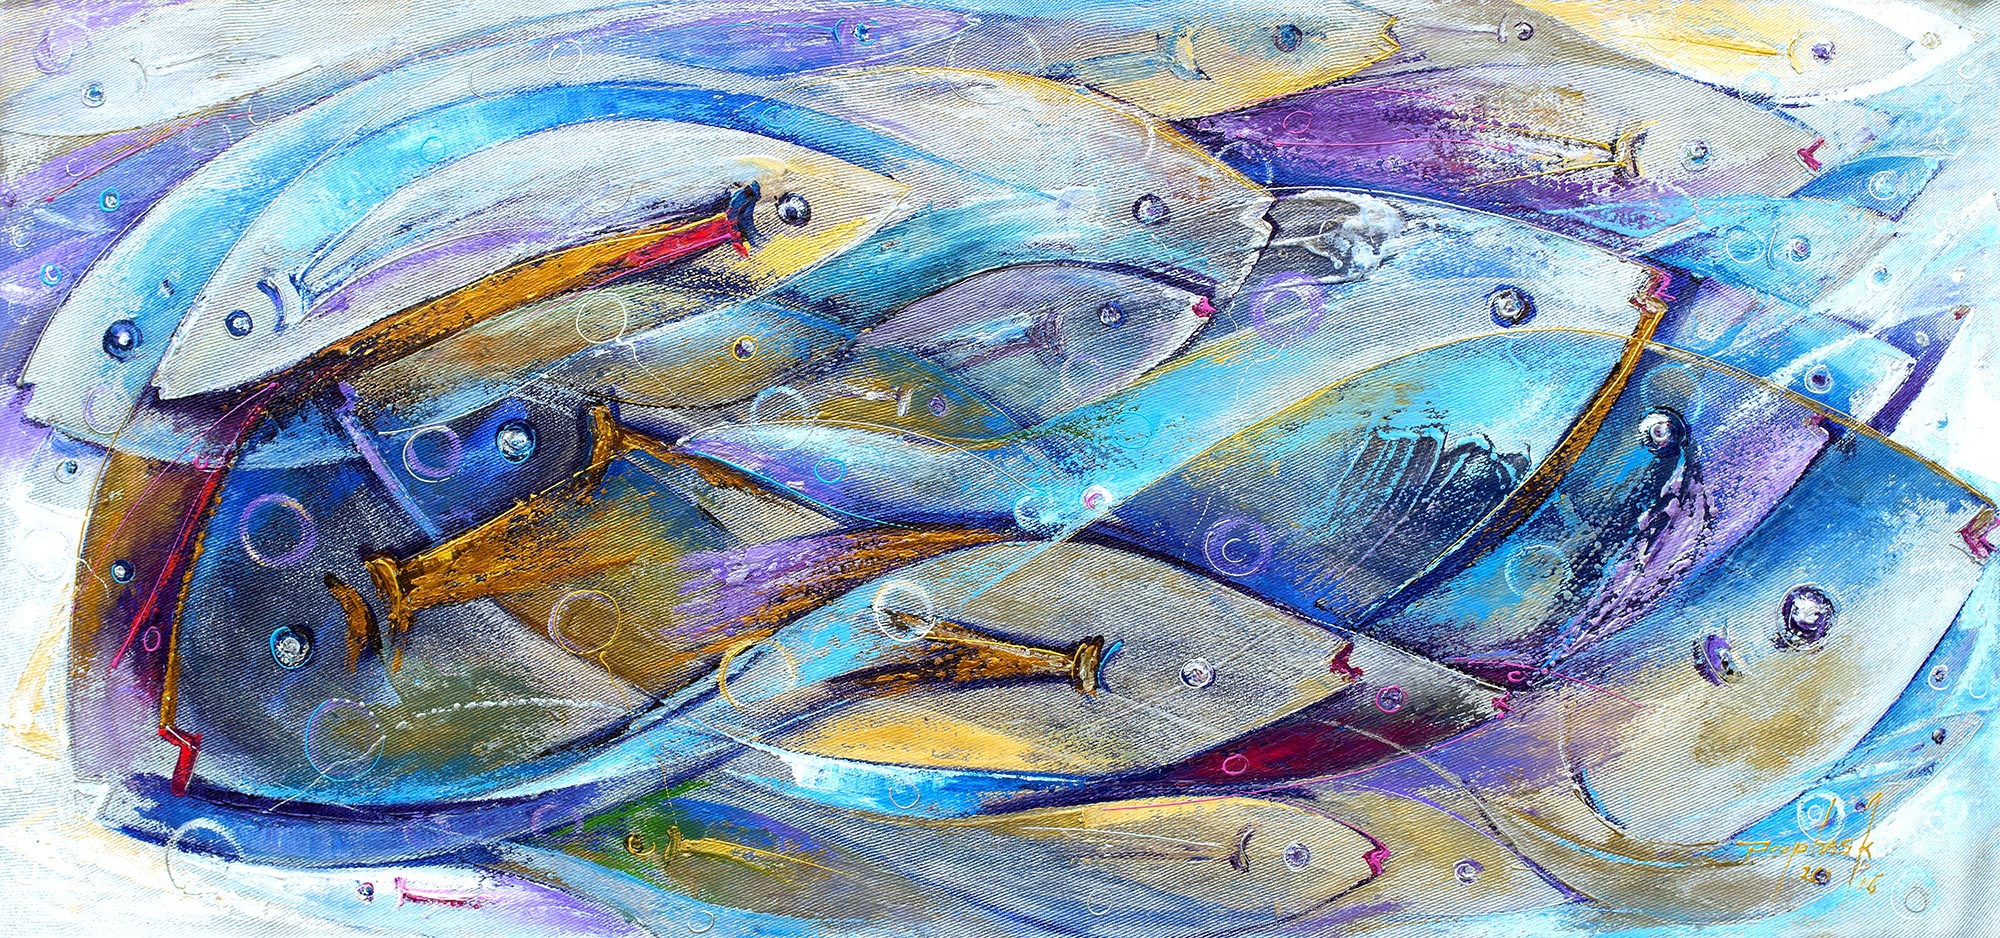 Unicef Market Abstract Themed Painting With Blue Fish Signed By Artist Interdependency